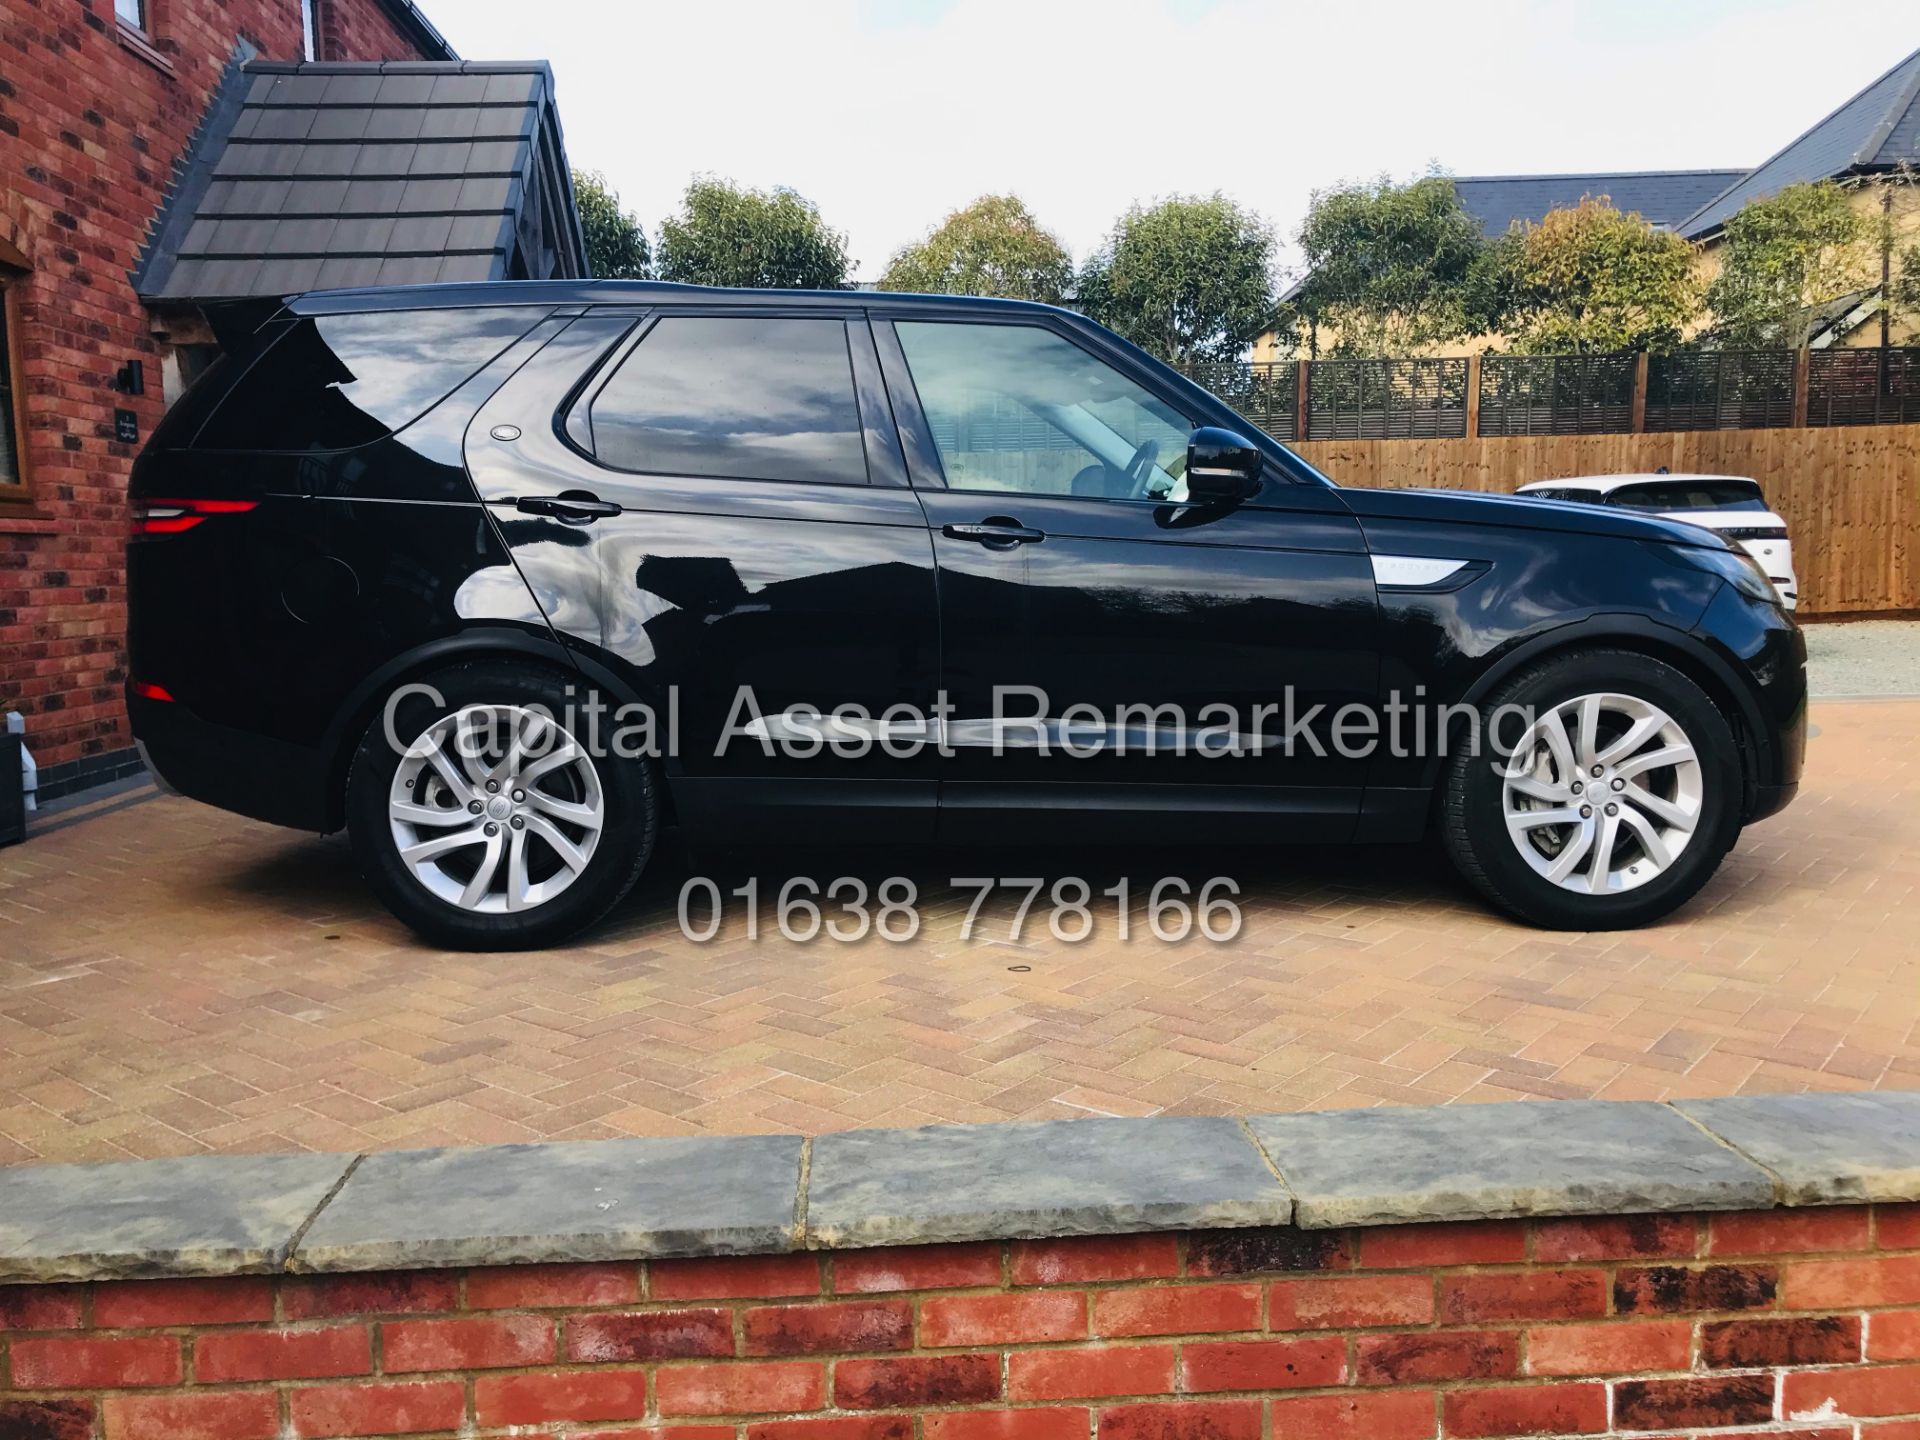 ON SALE LAND ROVER DISCOVERY 3.0 SDV6 "HSE EDITION"7 SEATER(19 REG) 1 OWNER-HUGE SPEC *PAN ROOF* 15K - Image 11 of 27